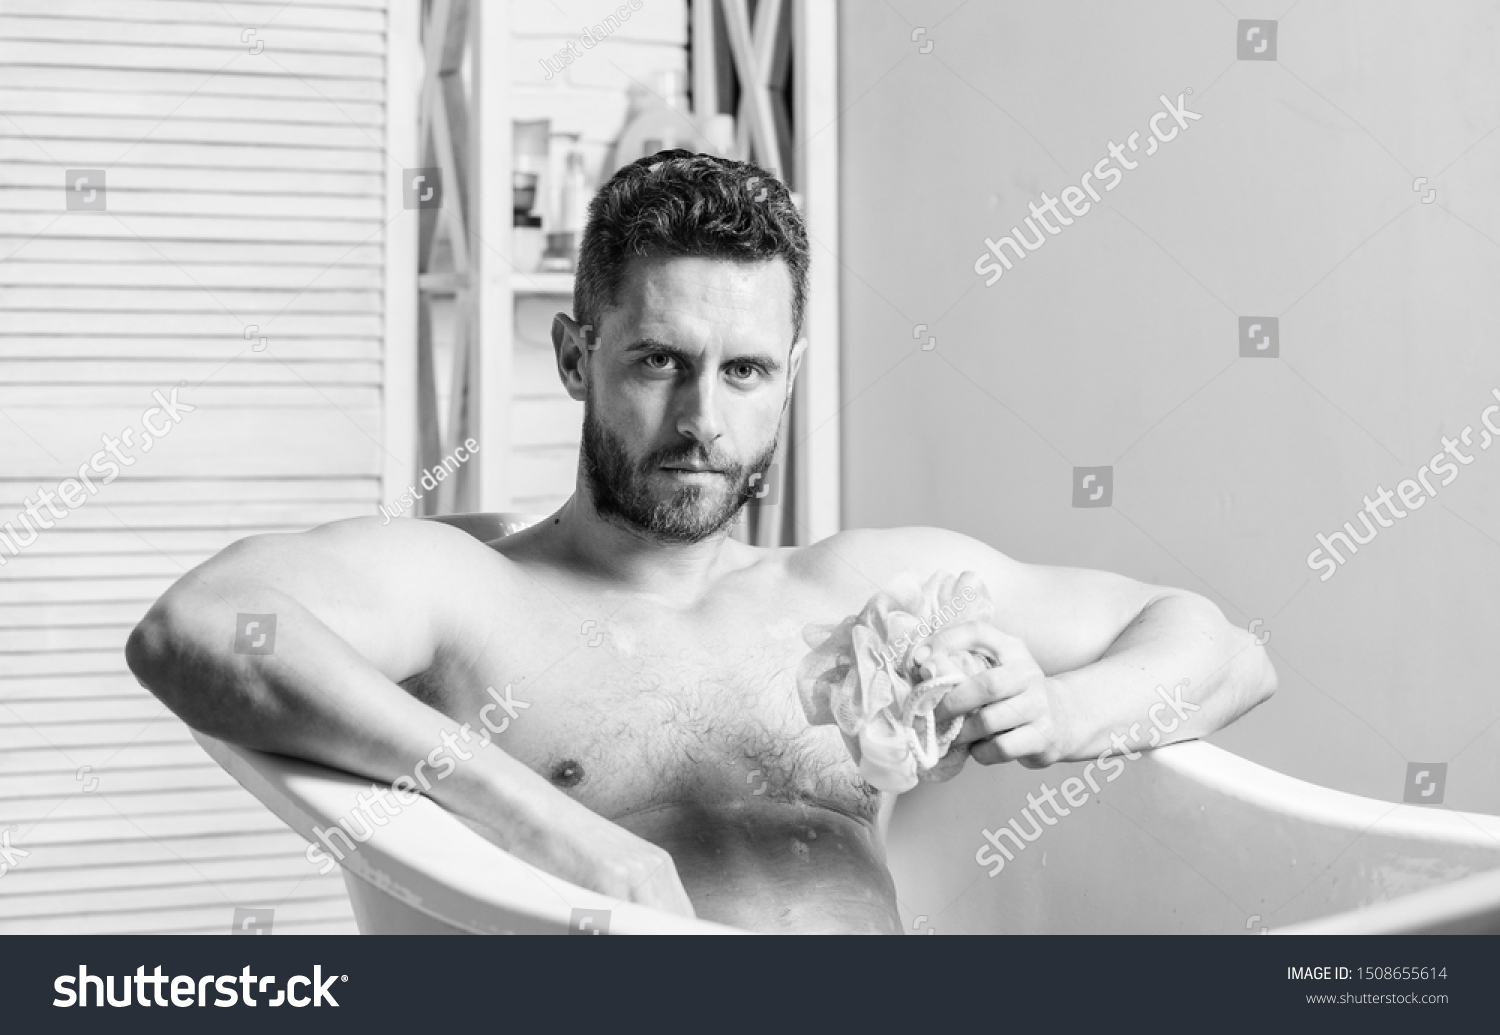 man wash muscular body with foam sponge. Macho attractive nude guy. Sexy man in bathroom. Wash off foam with water carefully. Sex and relaxation concept. Macho naked in bathtub. Sexy reality. #1508655614